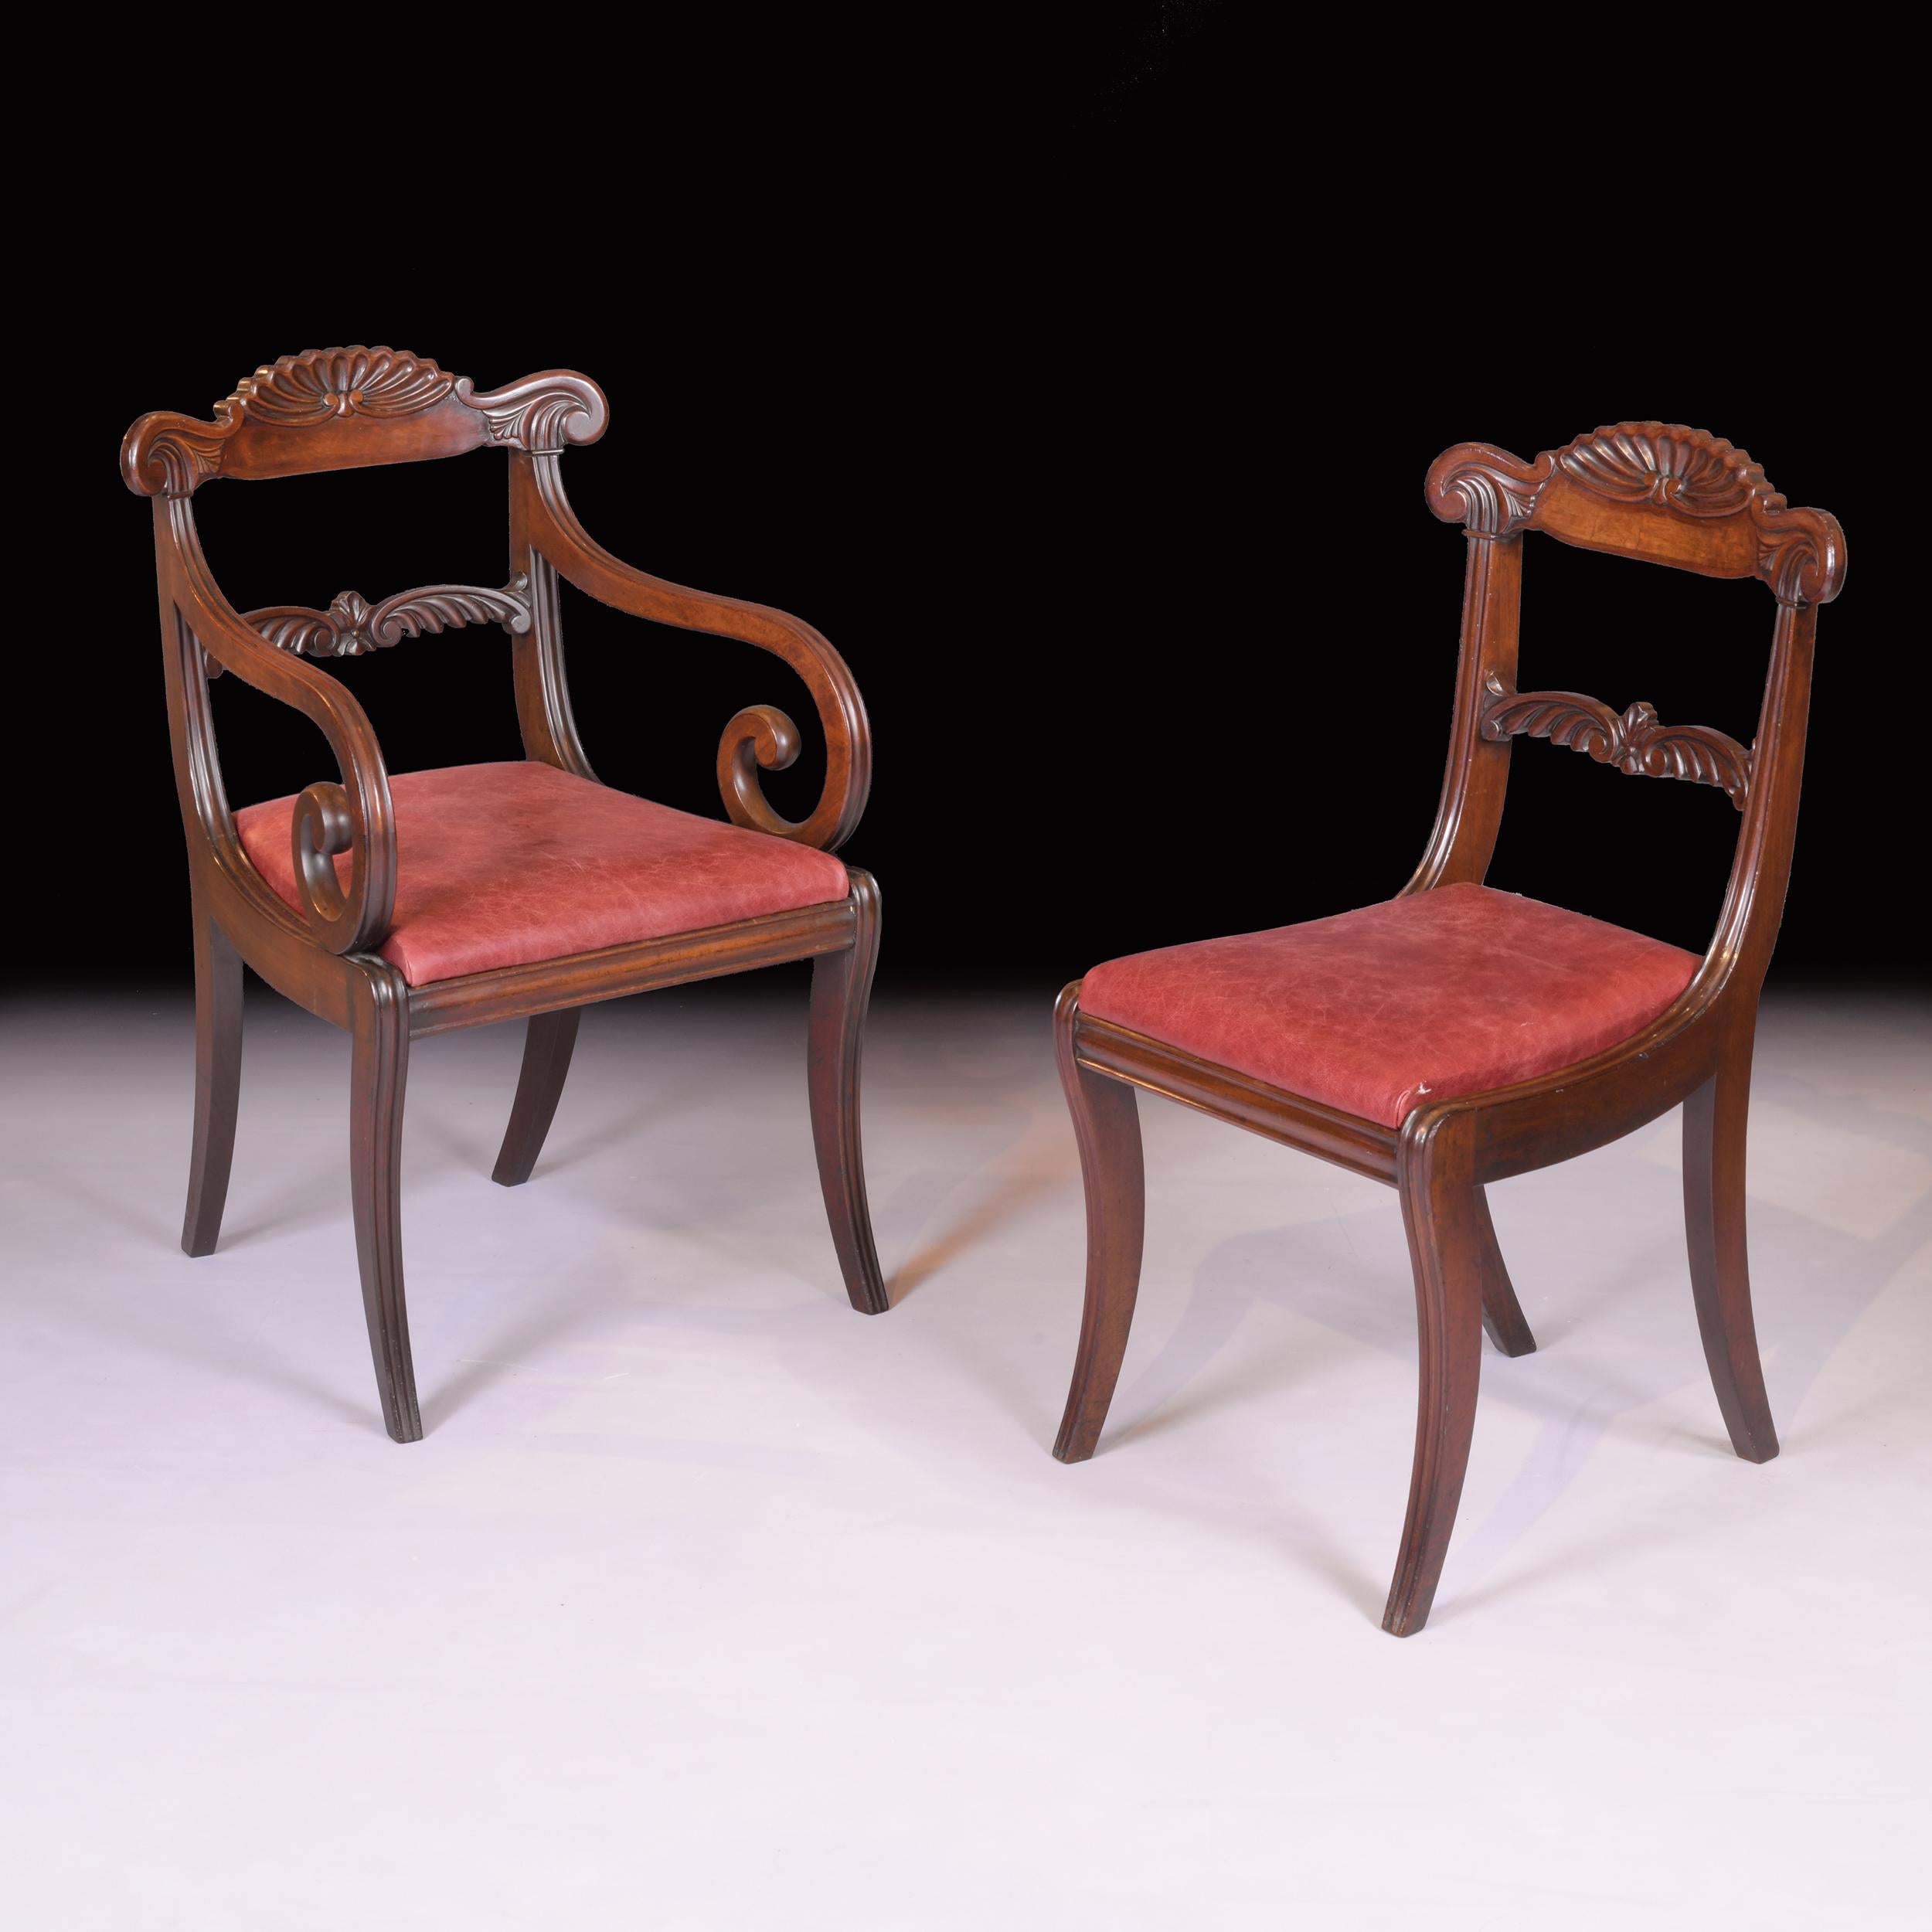 English Set of 10 Early 19th Century Regency Mahogany Dining Room Chairs For Sale